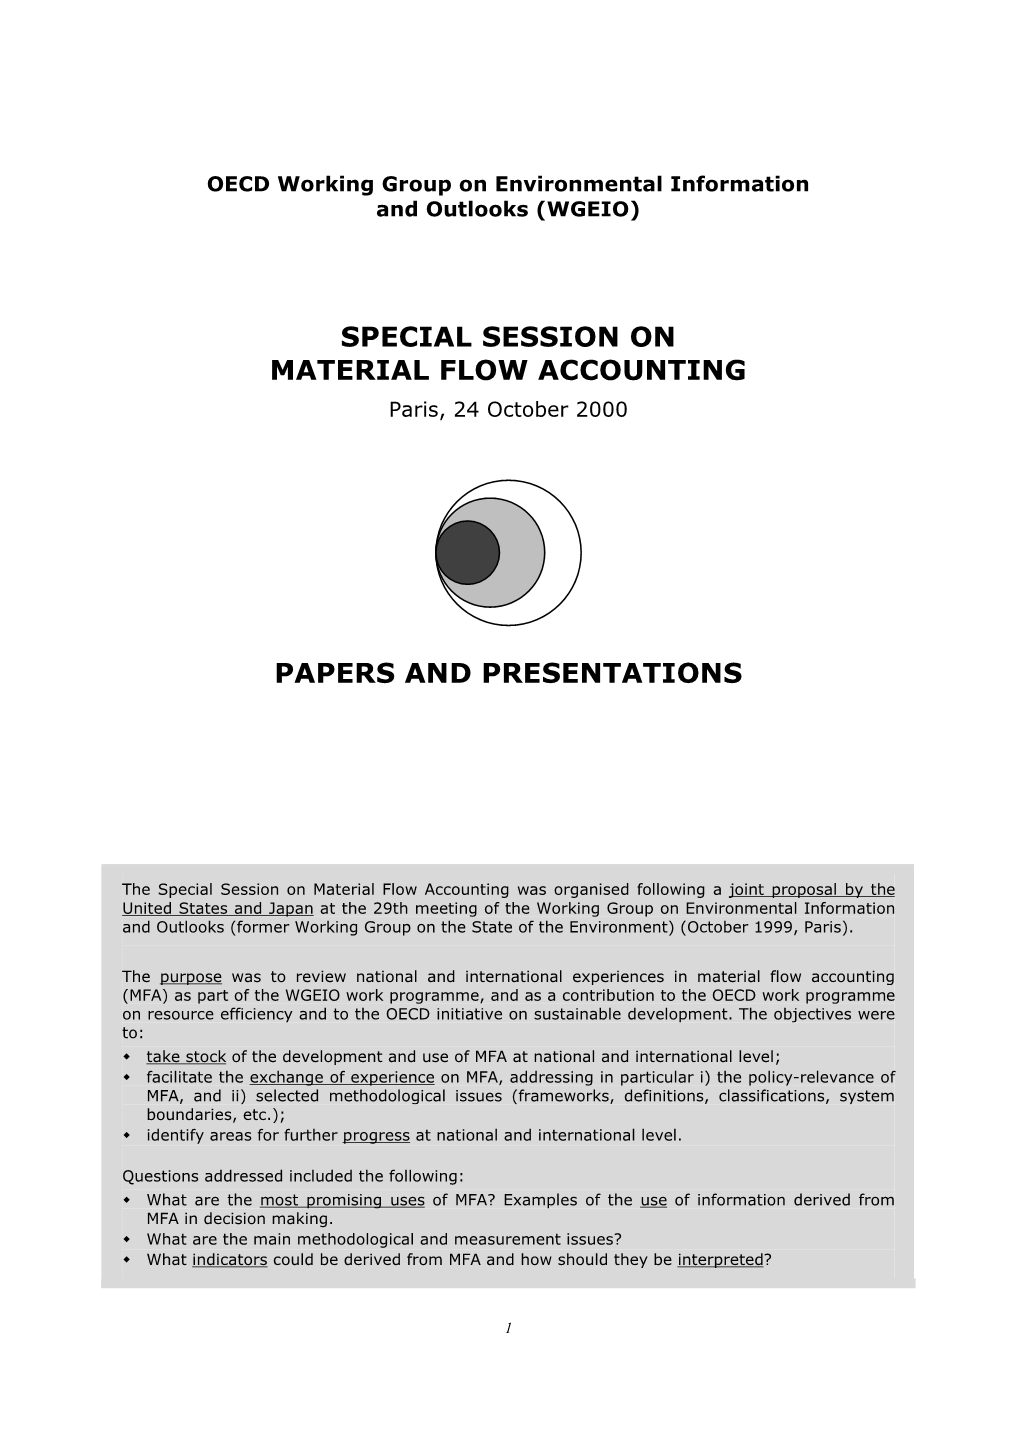 SPECIAL SESSION on MATERIAL FLOW ACCOUNTING Paris, 24 October 2000